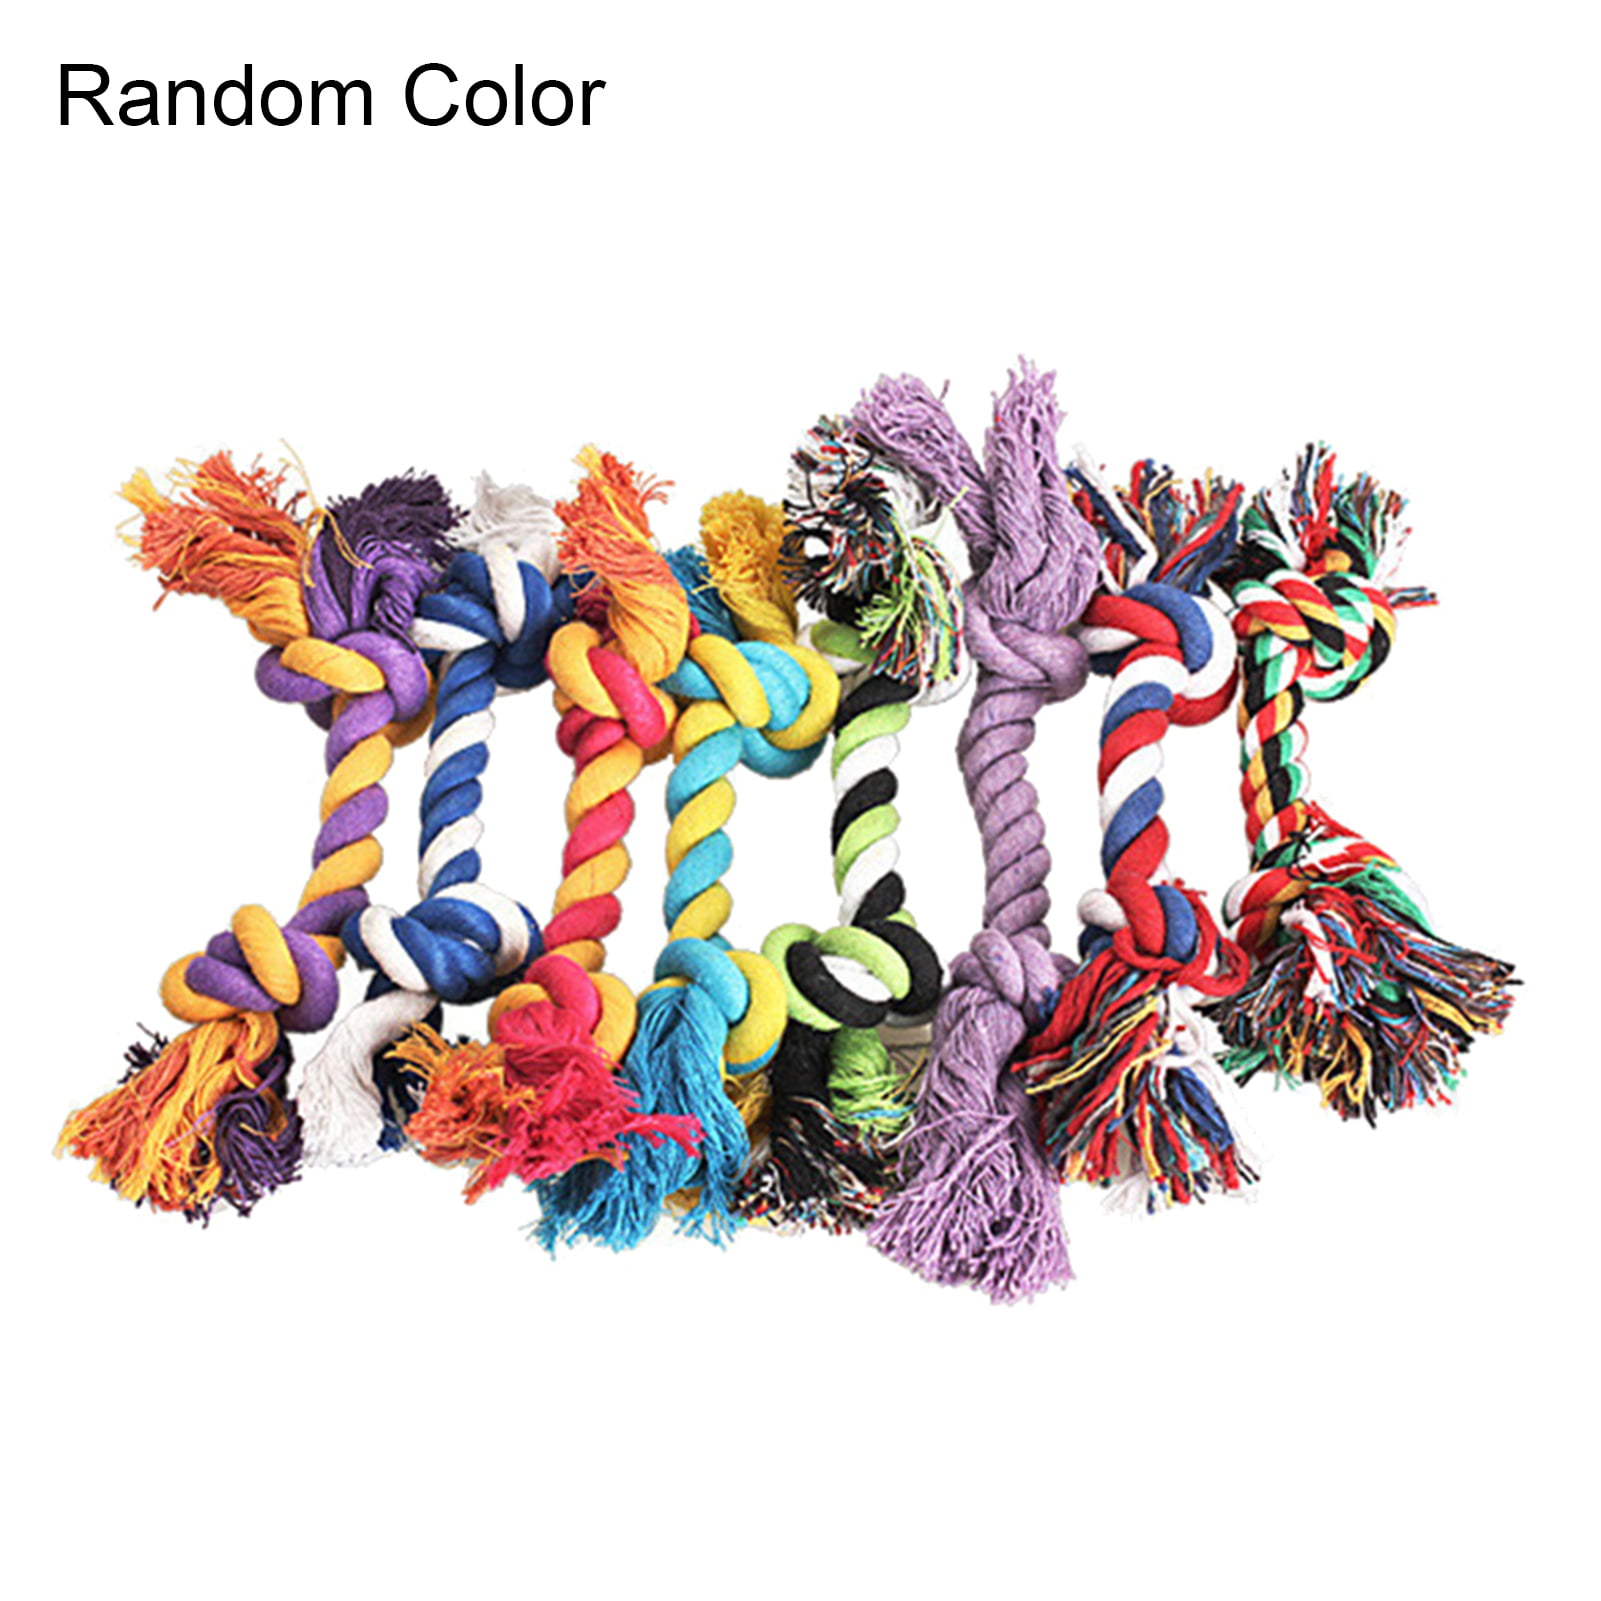 Lx10tqy Puppy Cotton Braided Double Knot Rope Chew Anti Bite Funny Toy Pet Dog Supplies Random Color 28cm